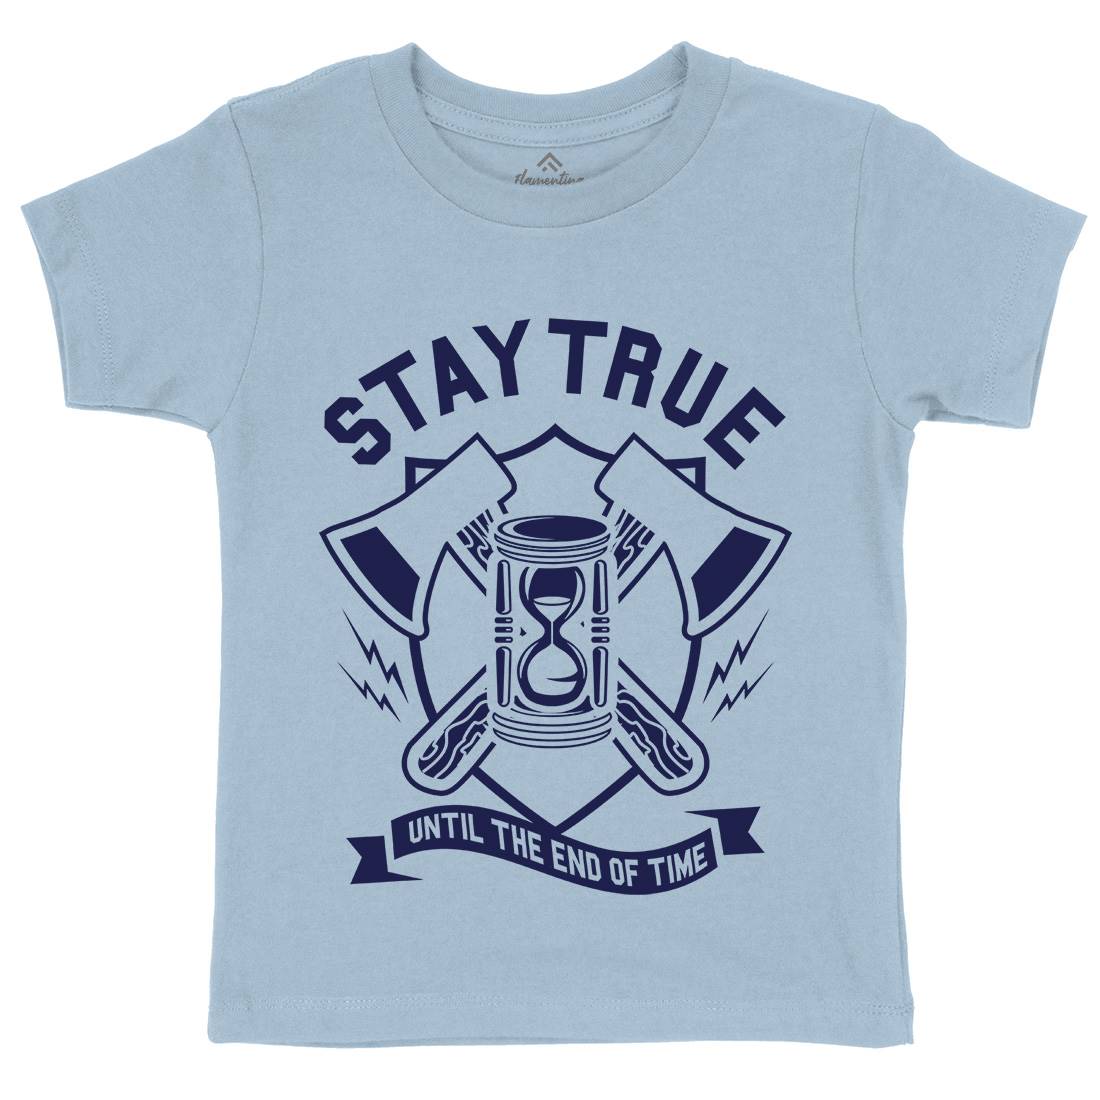 Stay True Kids Organic Crew Neck T-Shirt Quotes A285